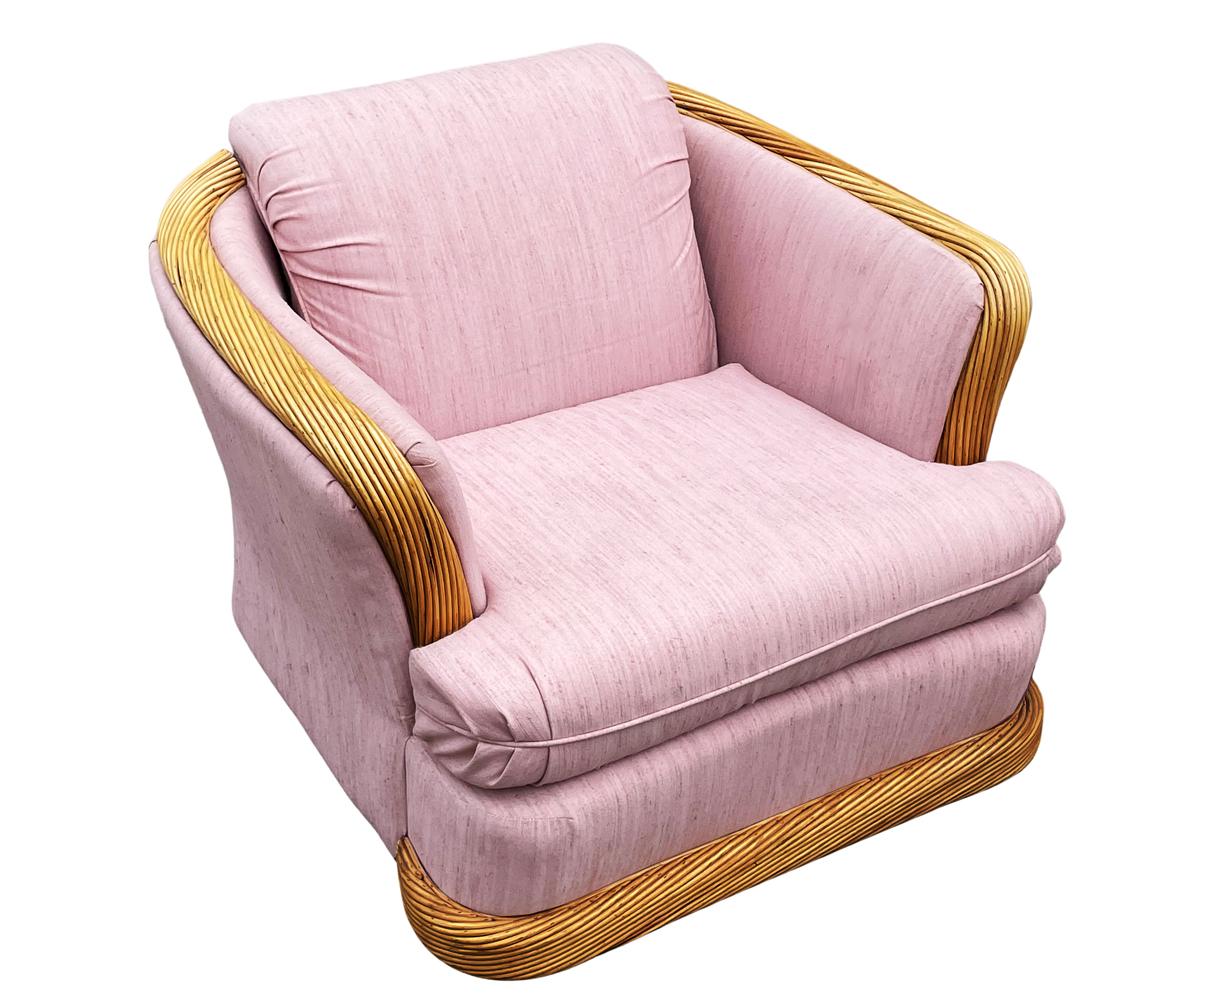 American Midcentury Coastal Modern Rattan Club or Lounge Chair with Pink Fabric For Sale